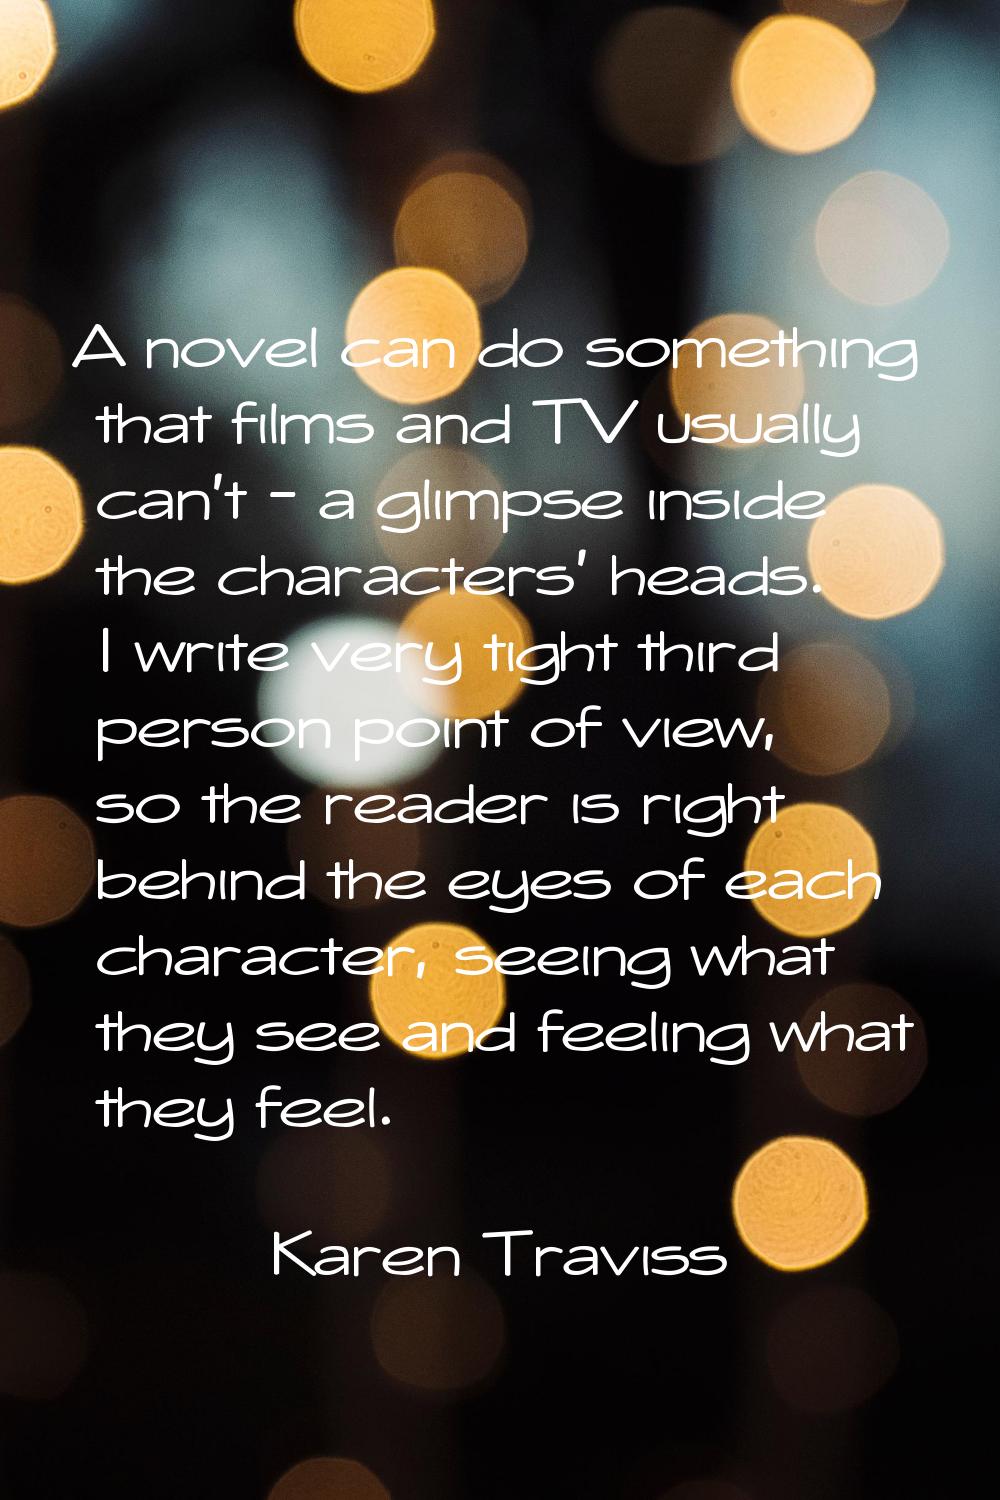 A novel can do something that films and TV usually can't - a glimpse inside the characters' heads. 